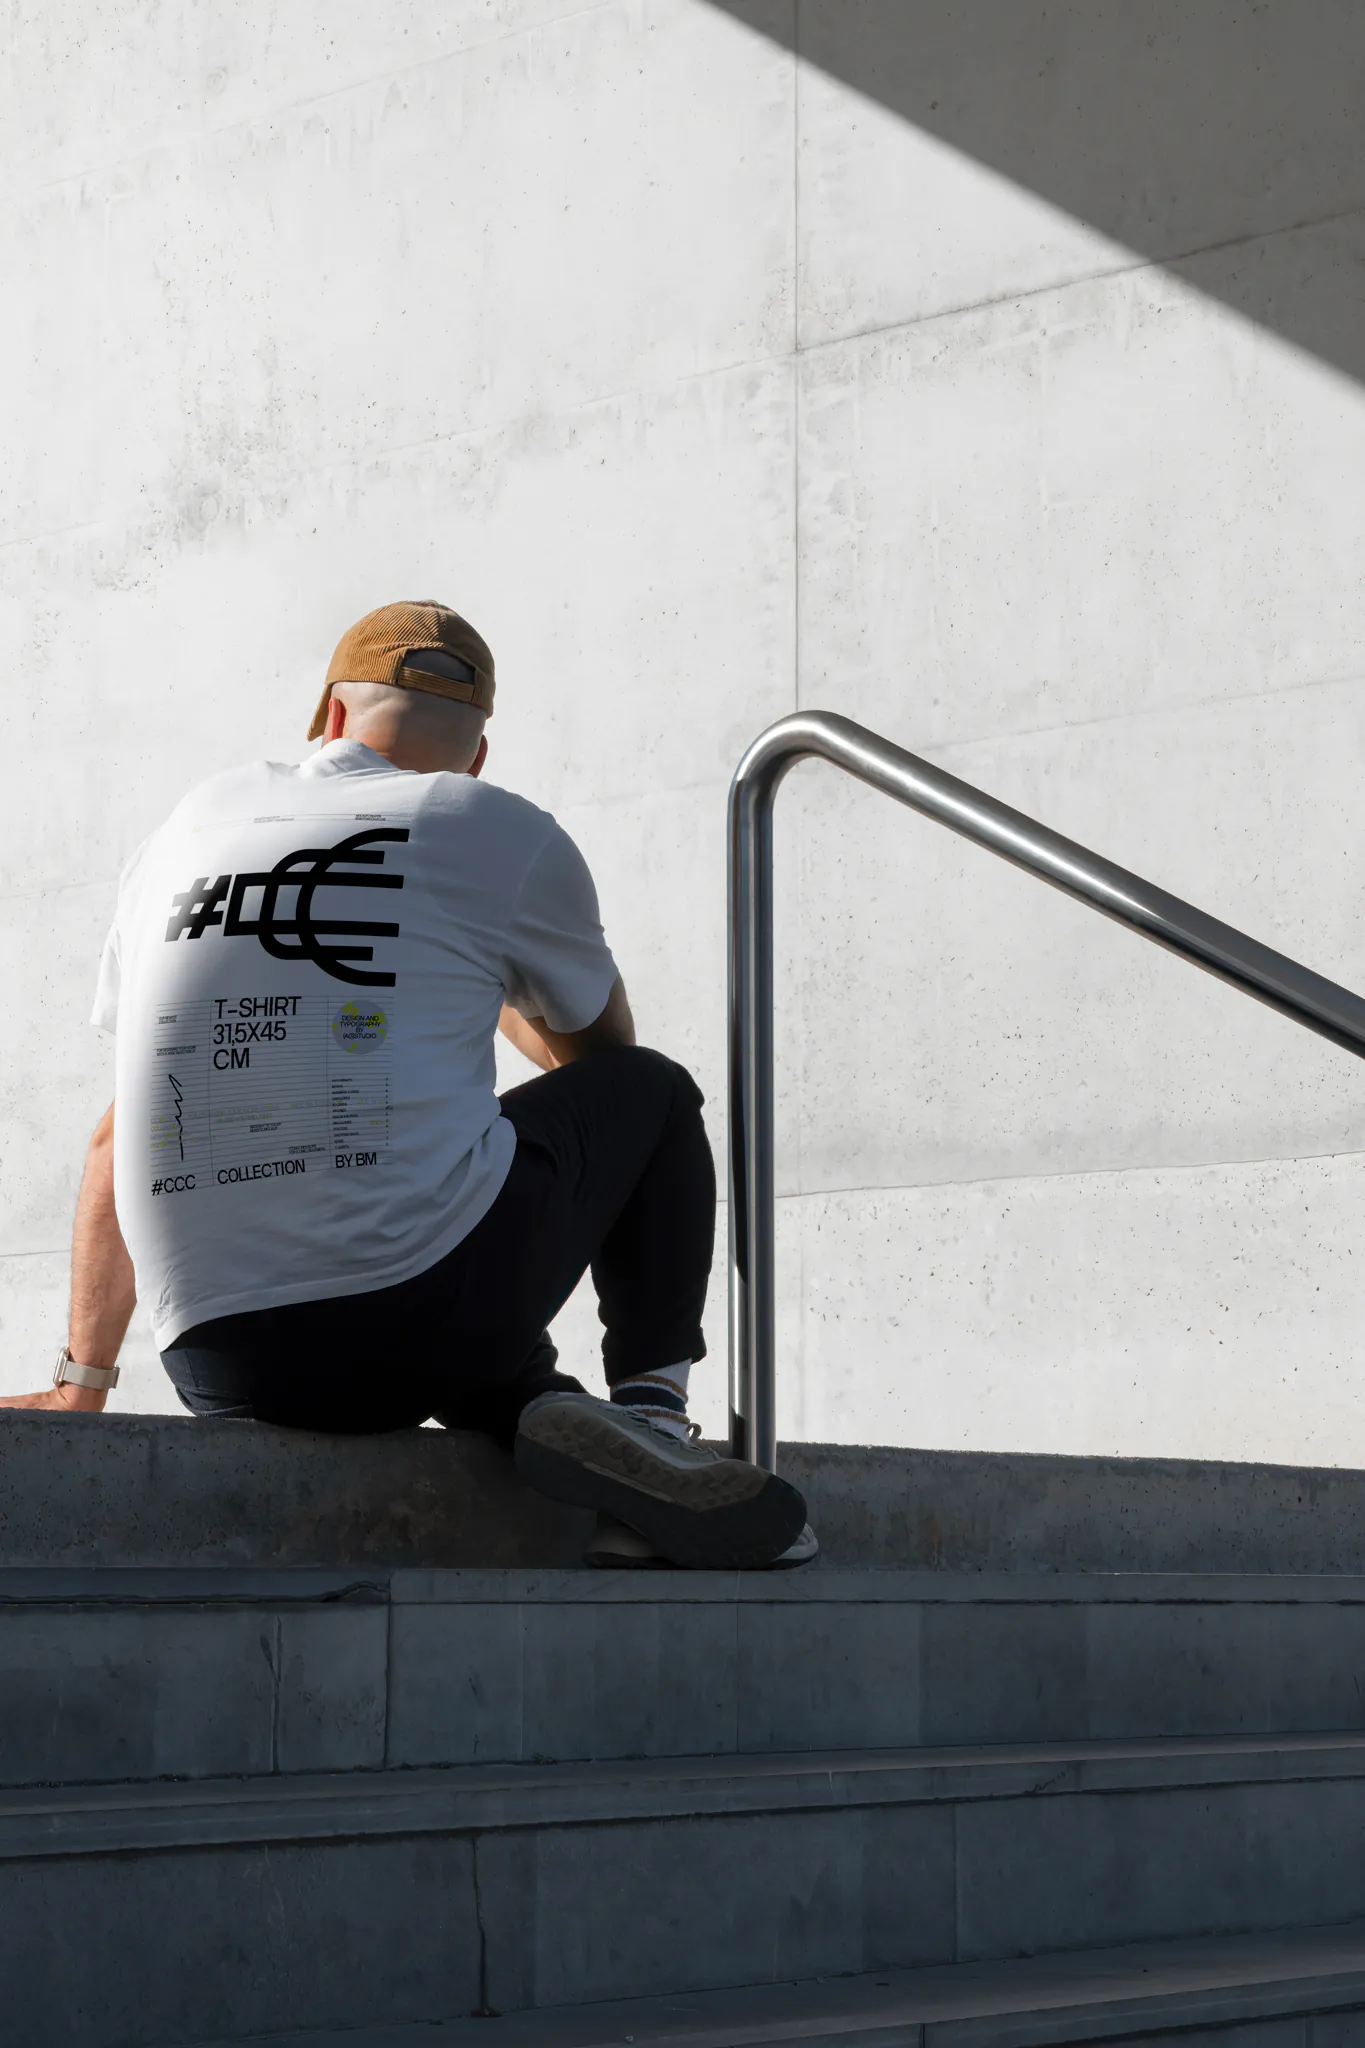 White t-shirt back PSD mockup. T-shirt mockup being worn by a man who is sitting on concrete stairs in a concrete scene. Fashion and apparel mockup.